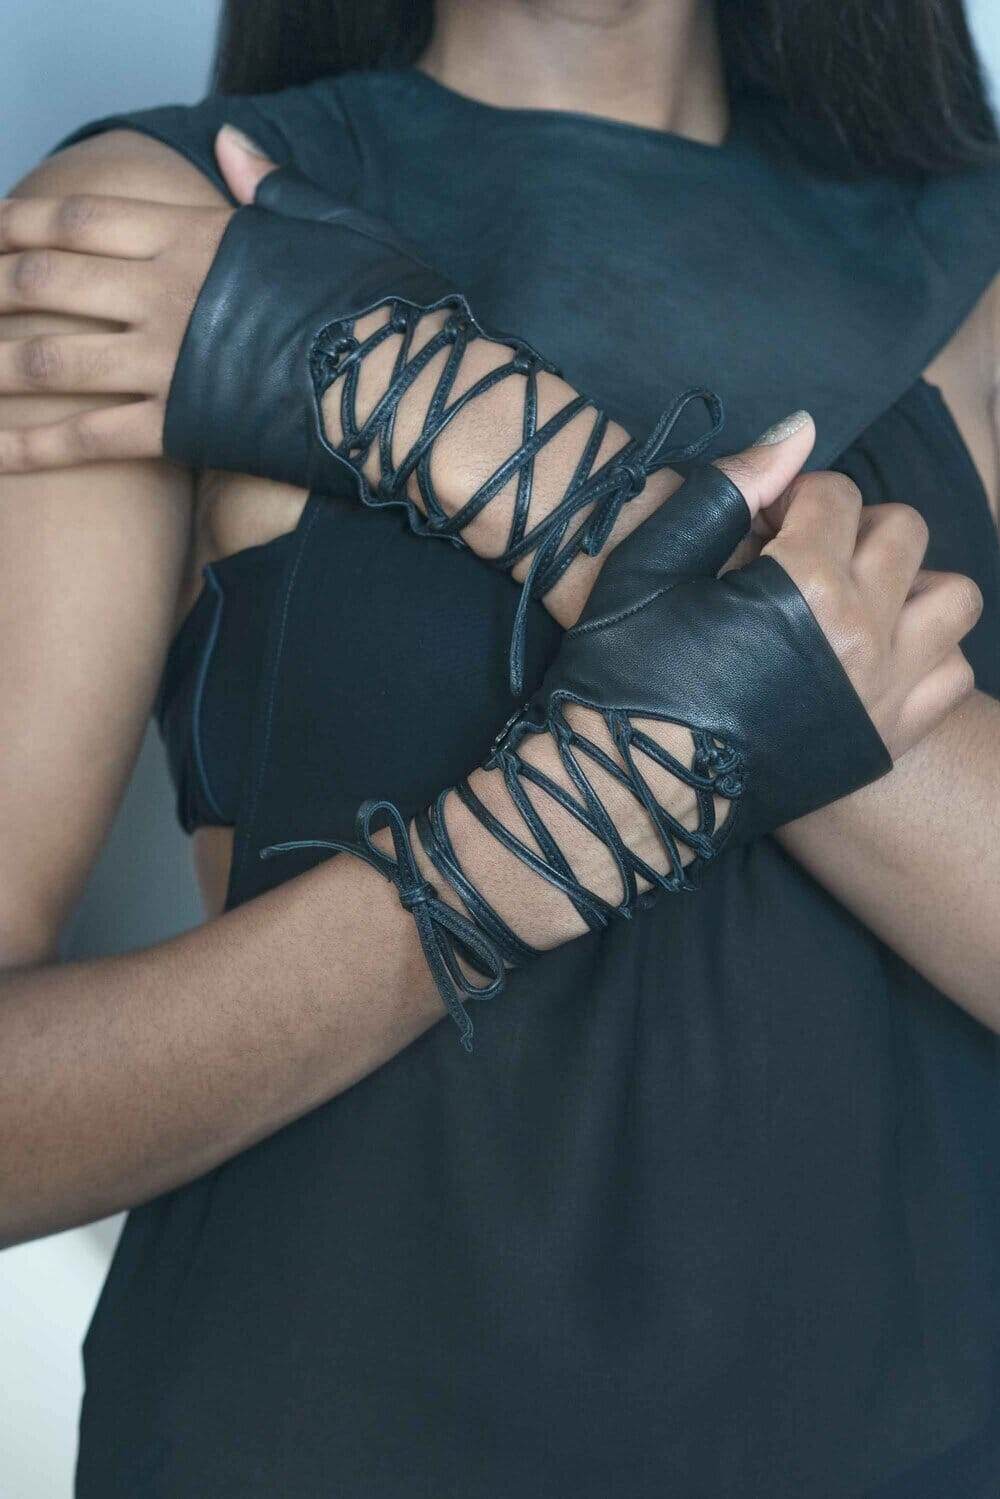 Lace up Leather Fingerless Gloves by Love Khaos